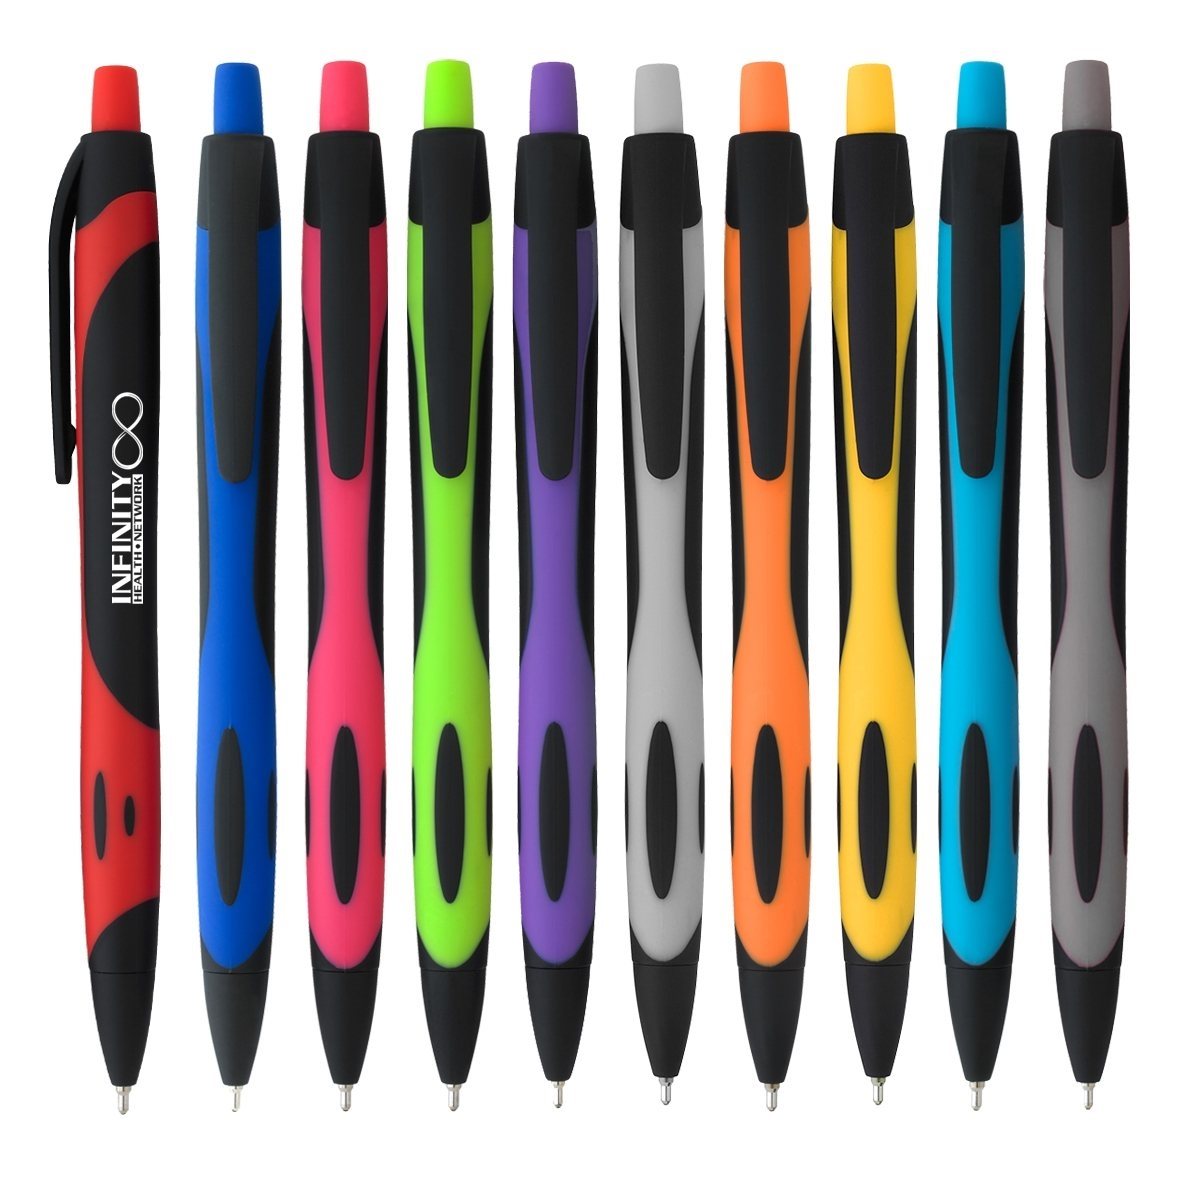 How can I order bulk personalized pens for my business?